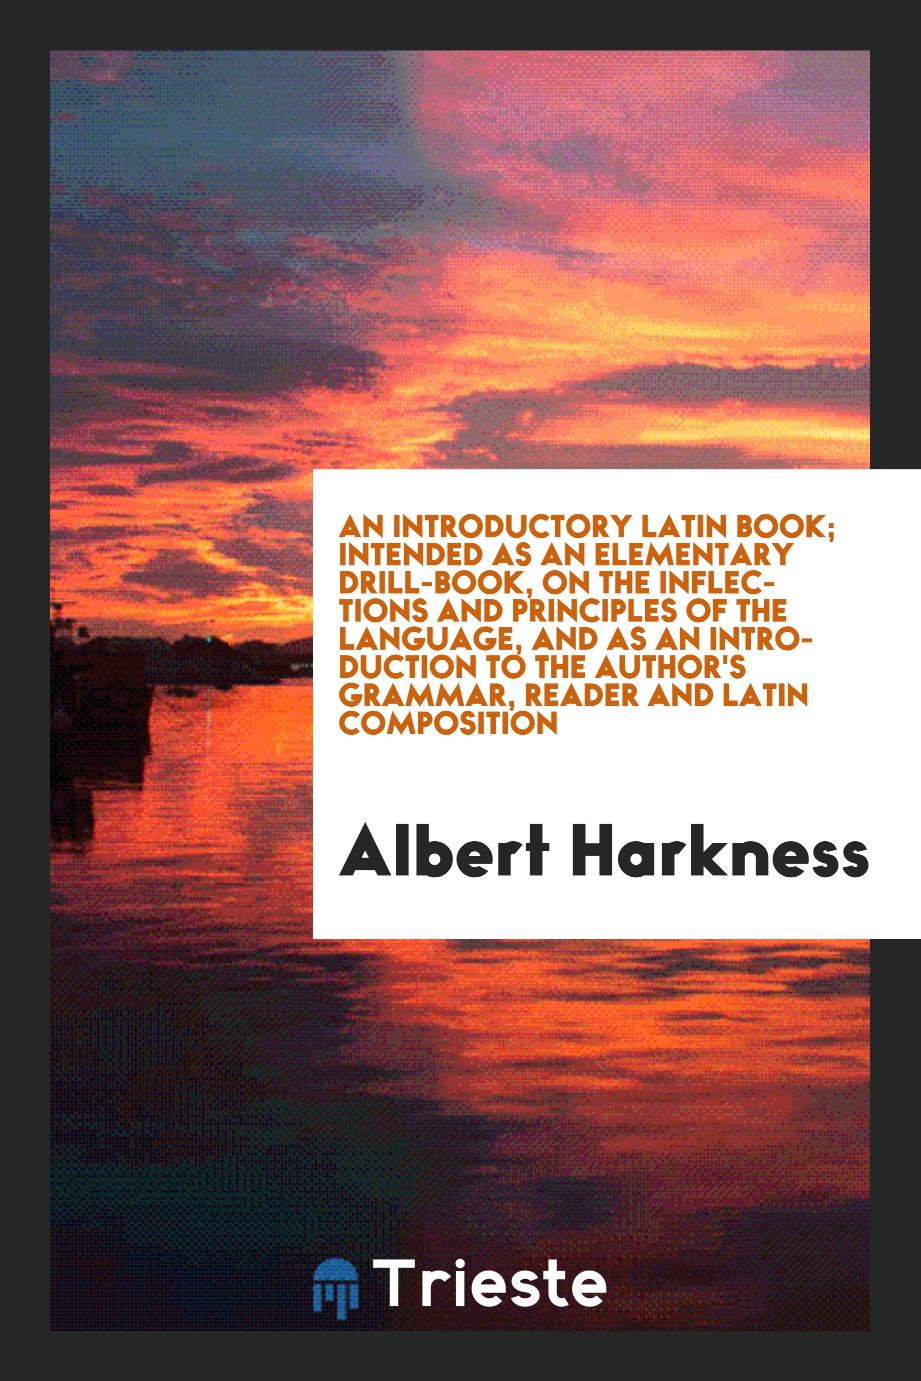 An Introductory Latin Book; Intended as an Elementary Drill-Book, on the Inflections and Principles of the Language, and as an Introduction to the Author's Grammar, Reader and Latin Composition